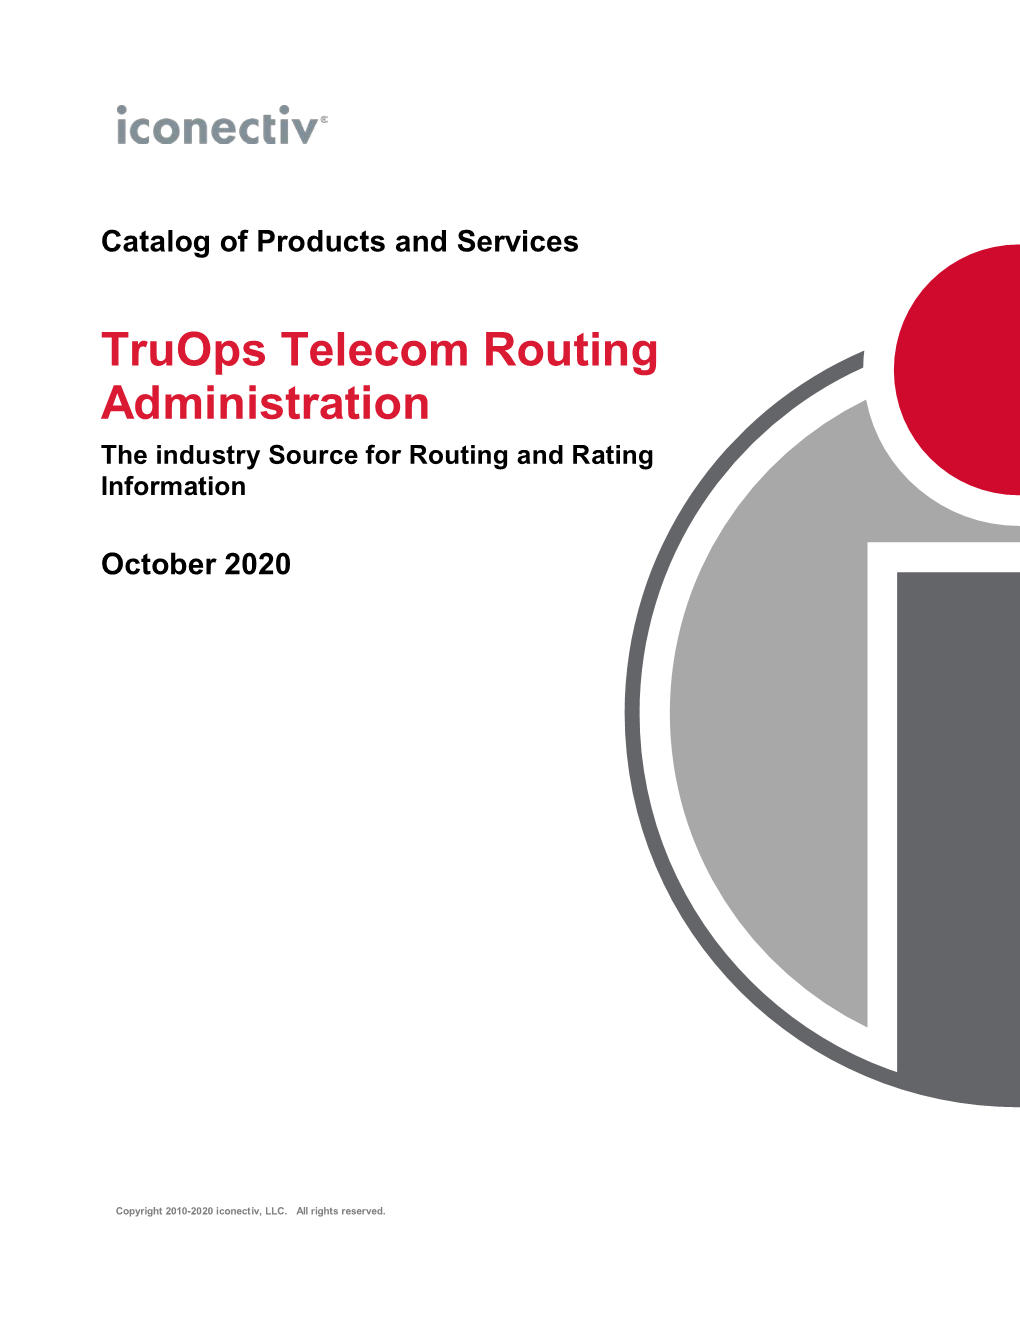 Truops Telecom Routing Administration the Industry Source for Routing and Rating Information